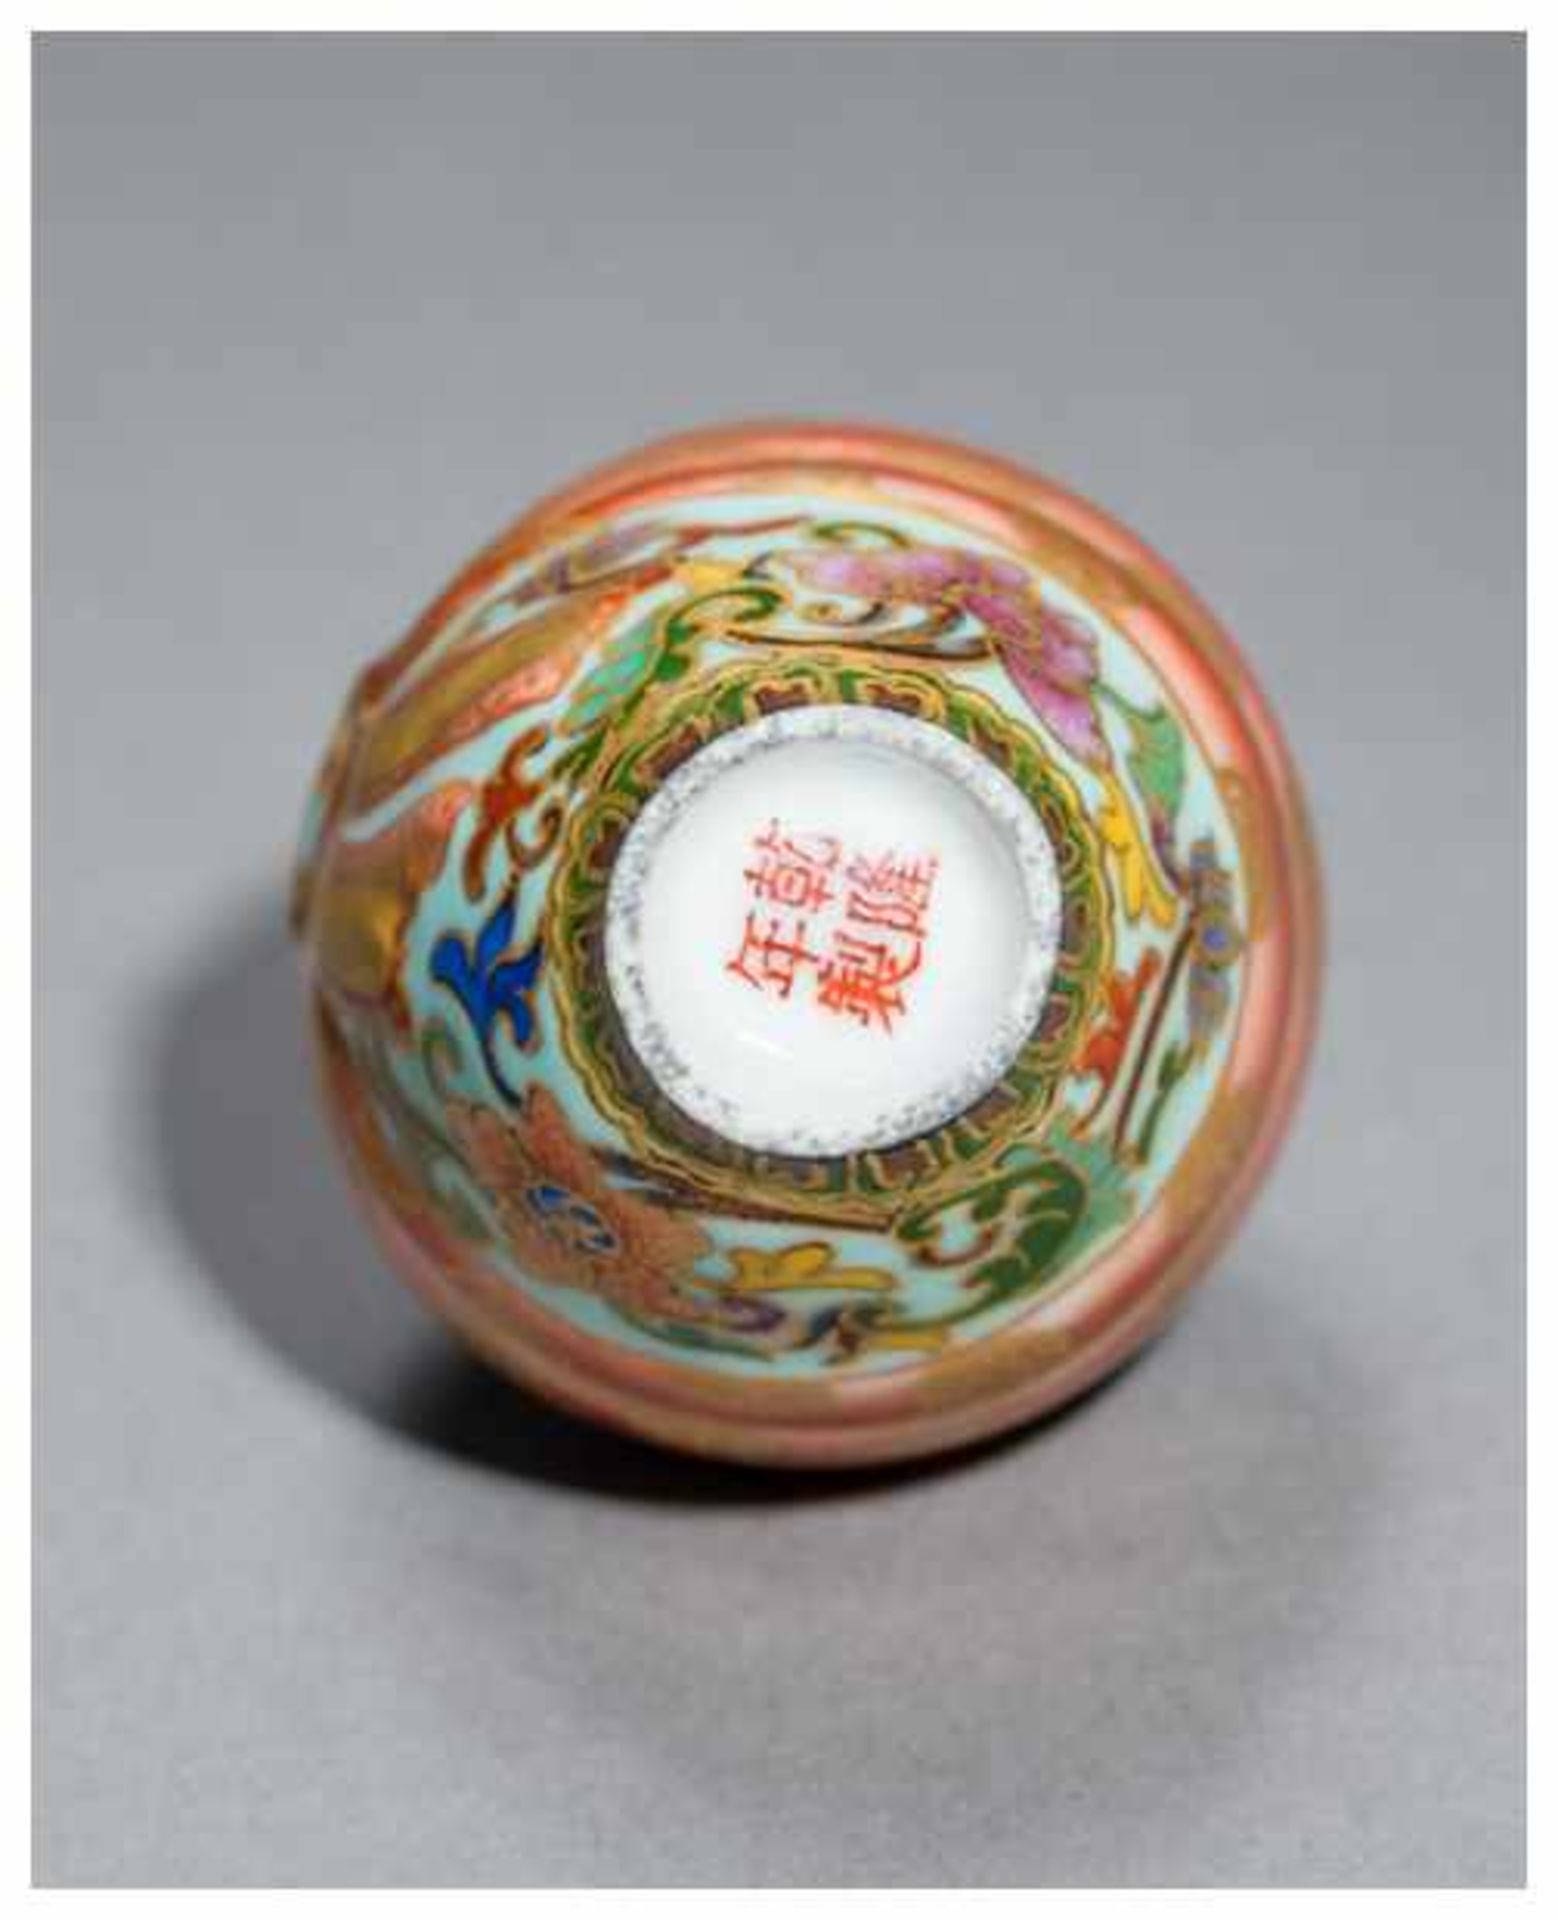 AN ATTRACTIVE PORCELAIN SNUFF BOTTLE WITH ENAMEL PAINTING Porcelain with enamel painting. China, - Image 5 of 5